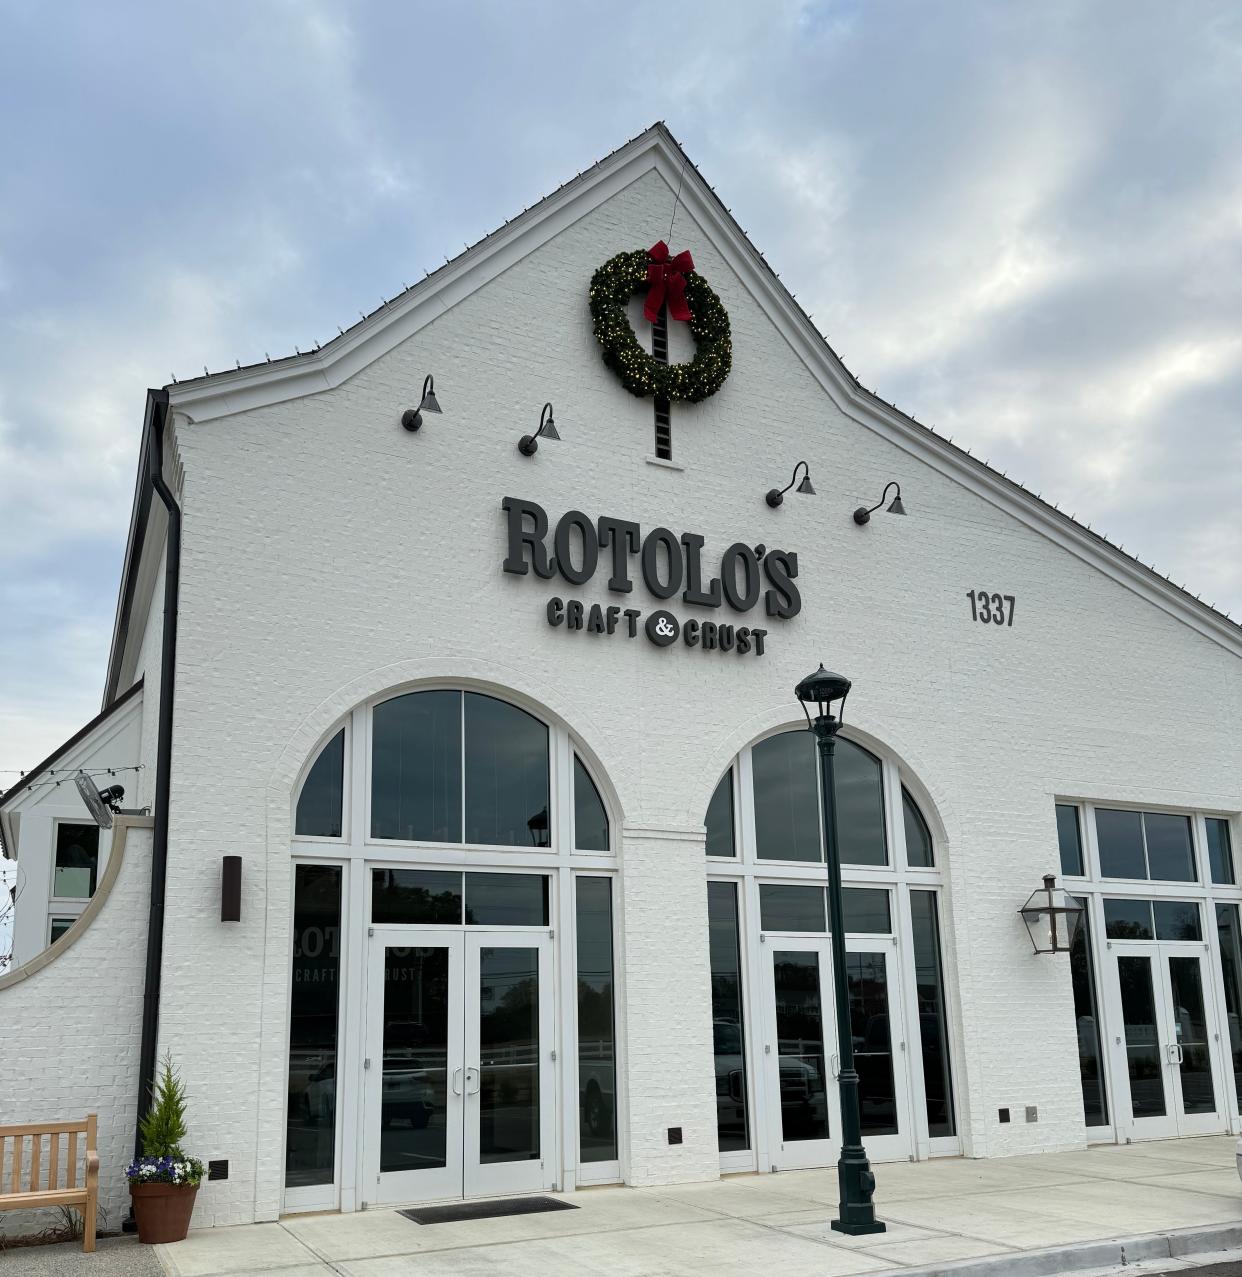 The new Rotolo's Craft & Crust in Collierville opened Monday at 1337 West Poplar Avenue